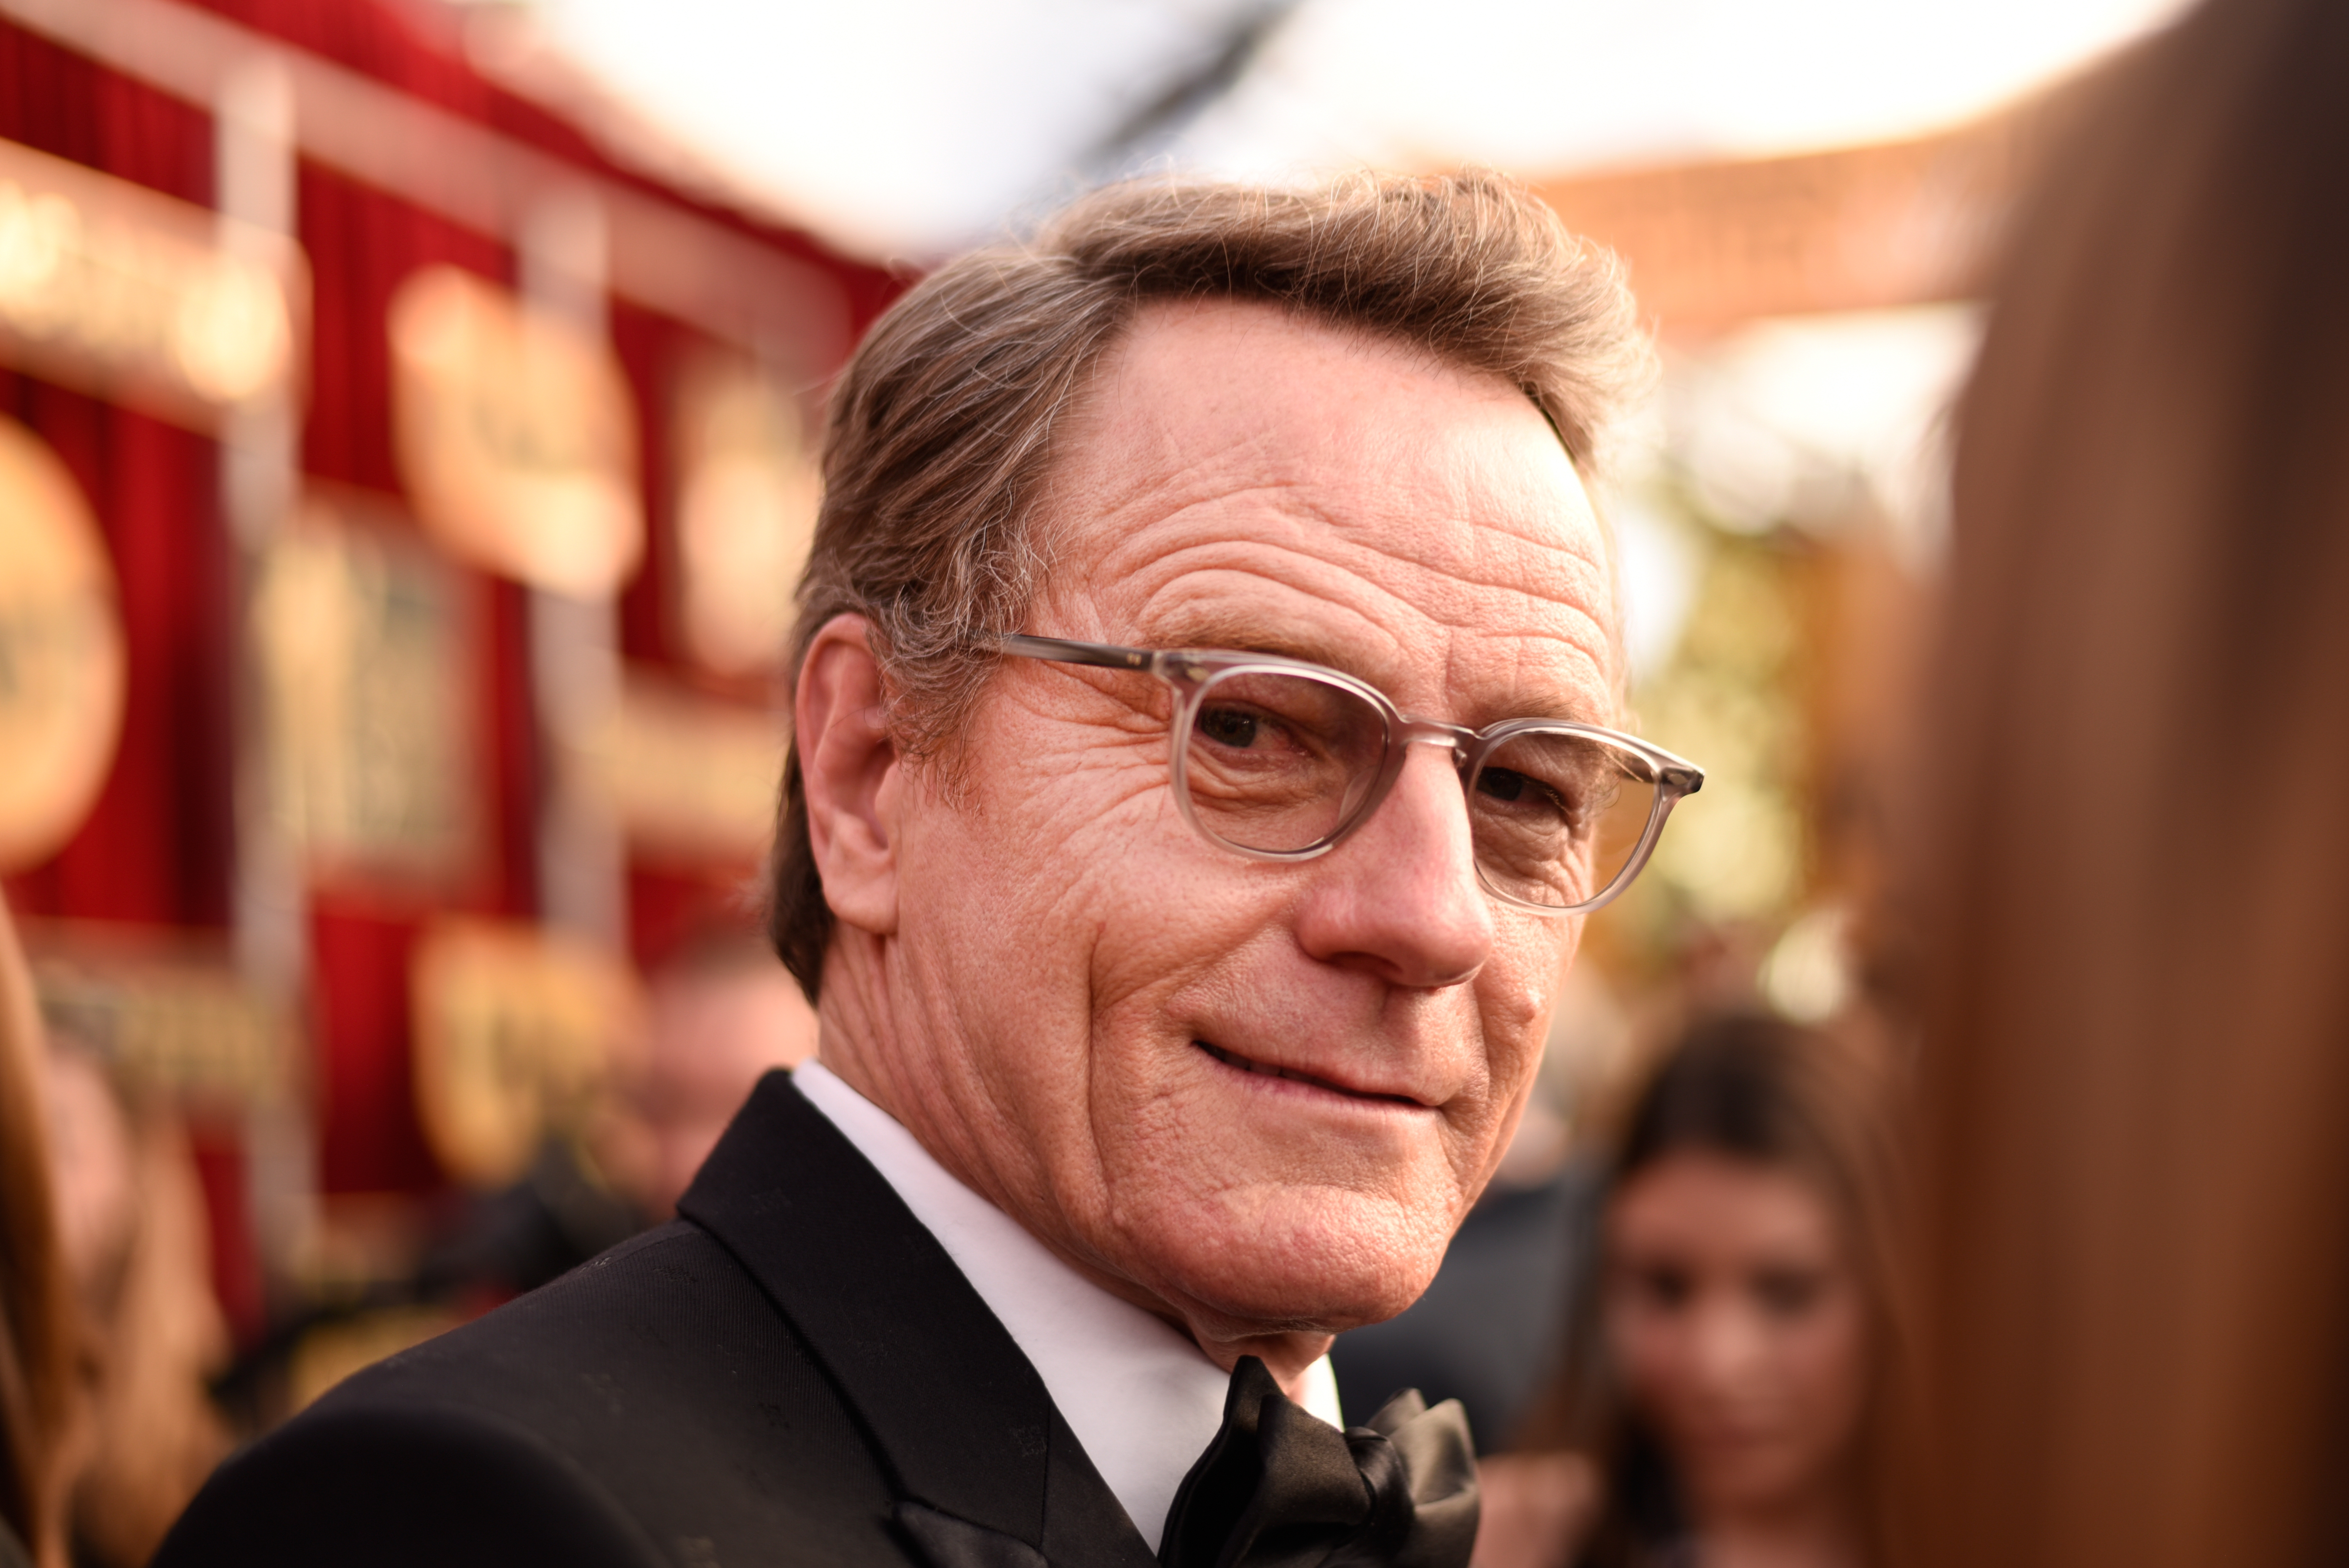 Bryan Cranston movies and TV shows